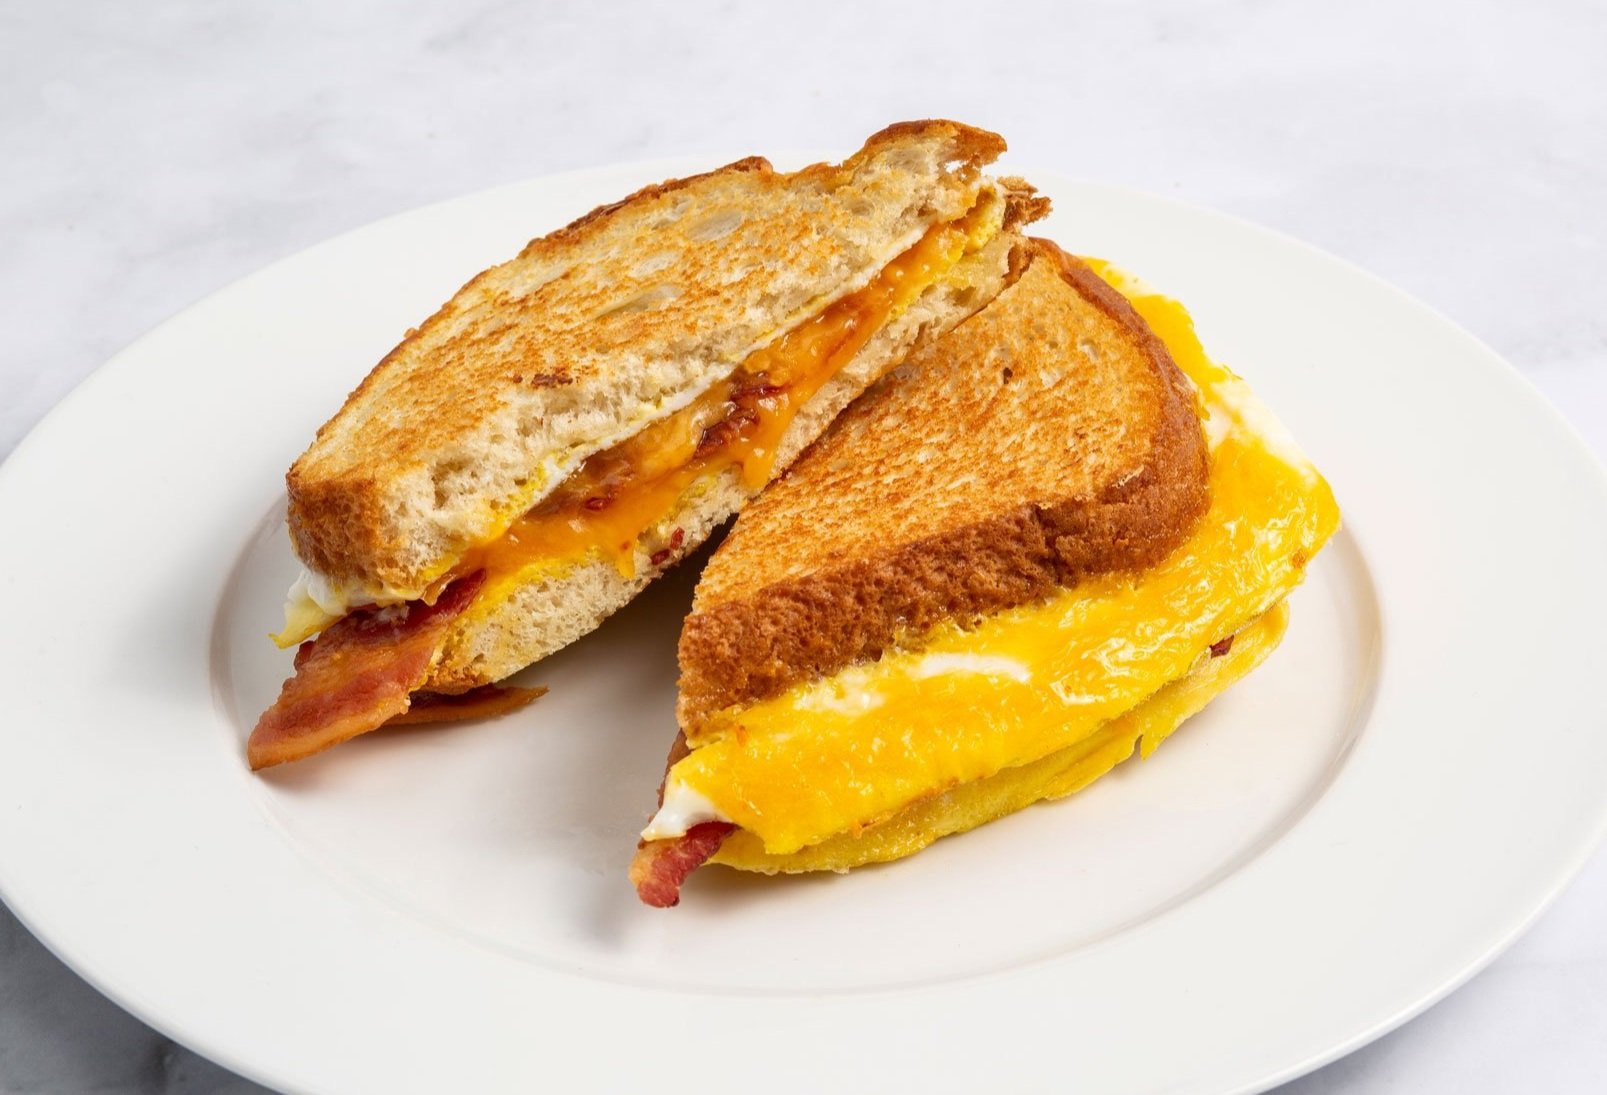 HOW TO MAKE A SANDWICH, Egg + Bacon + Cheese Sandwich